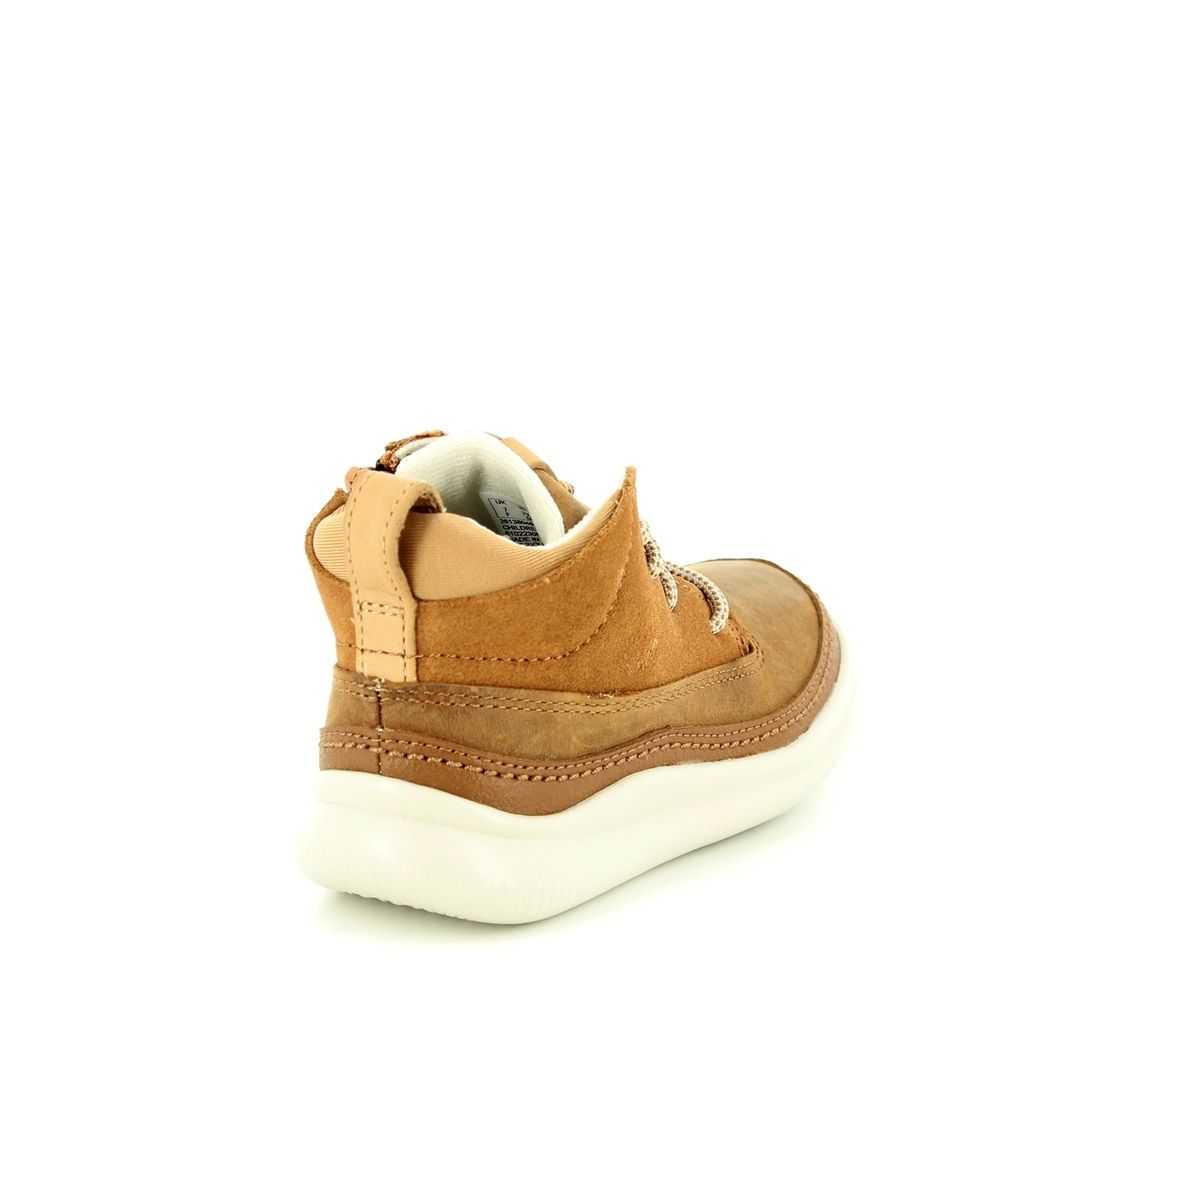 Boys Clarks Casual Ankle Boots 'Cloud Air'